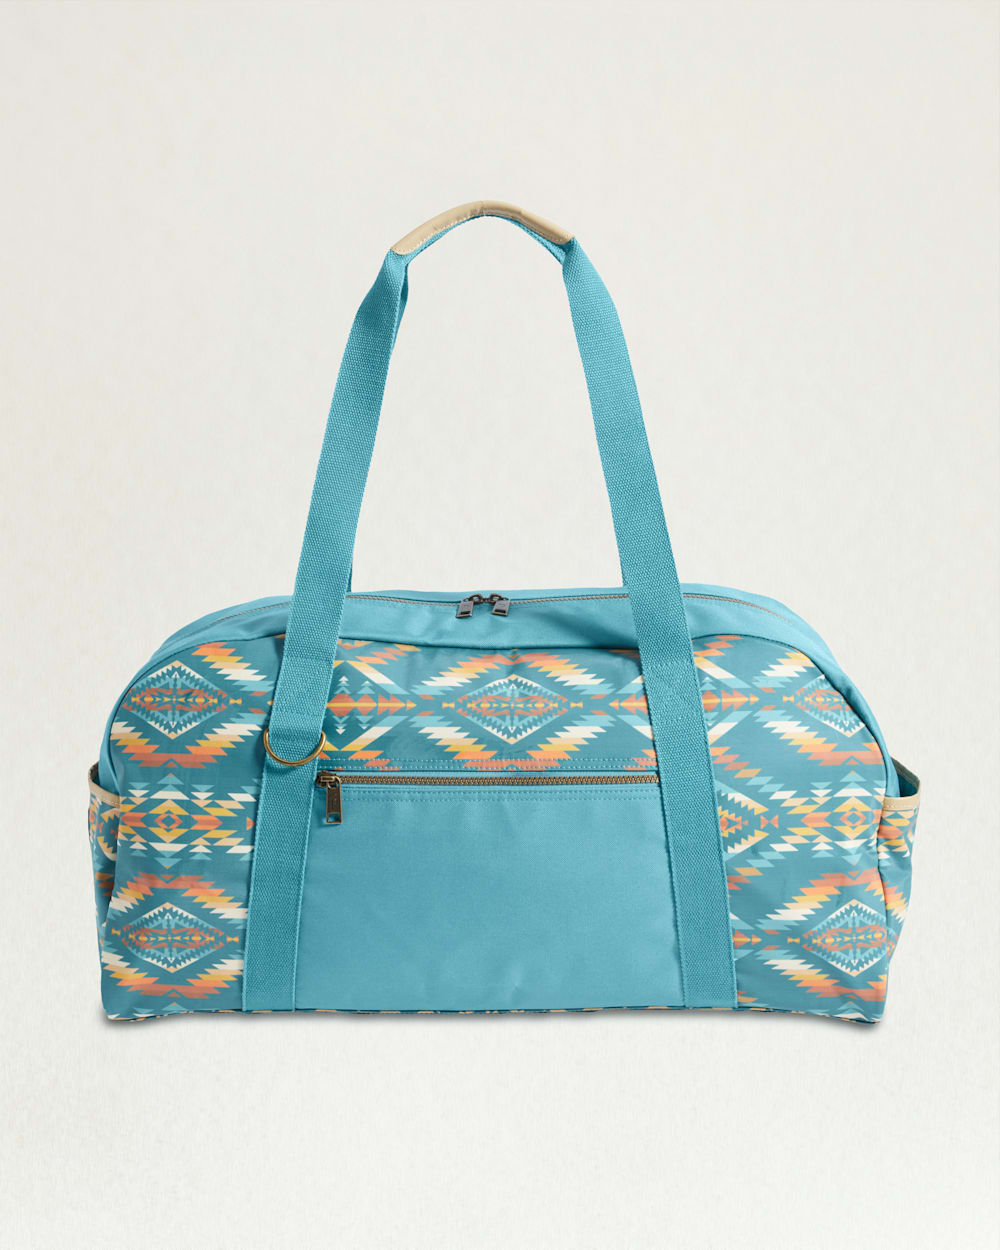 ALTERNATE VIEW OF SUMMERLAND BRIGHT CANOPY CANVAS WEEKENDER IN TURQUOISE image number 2